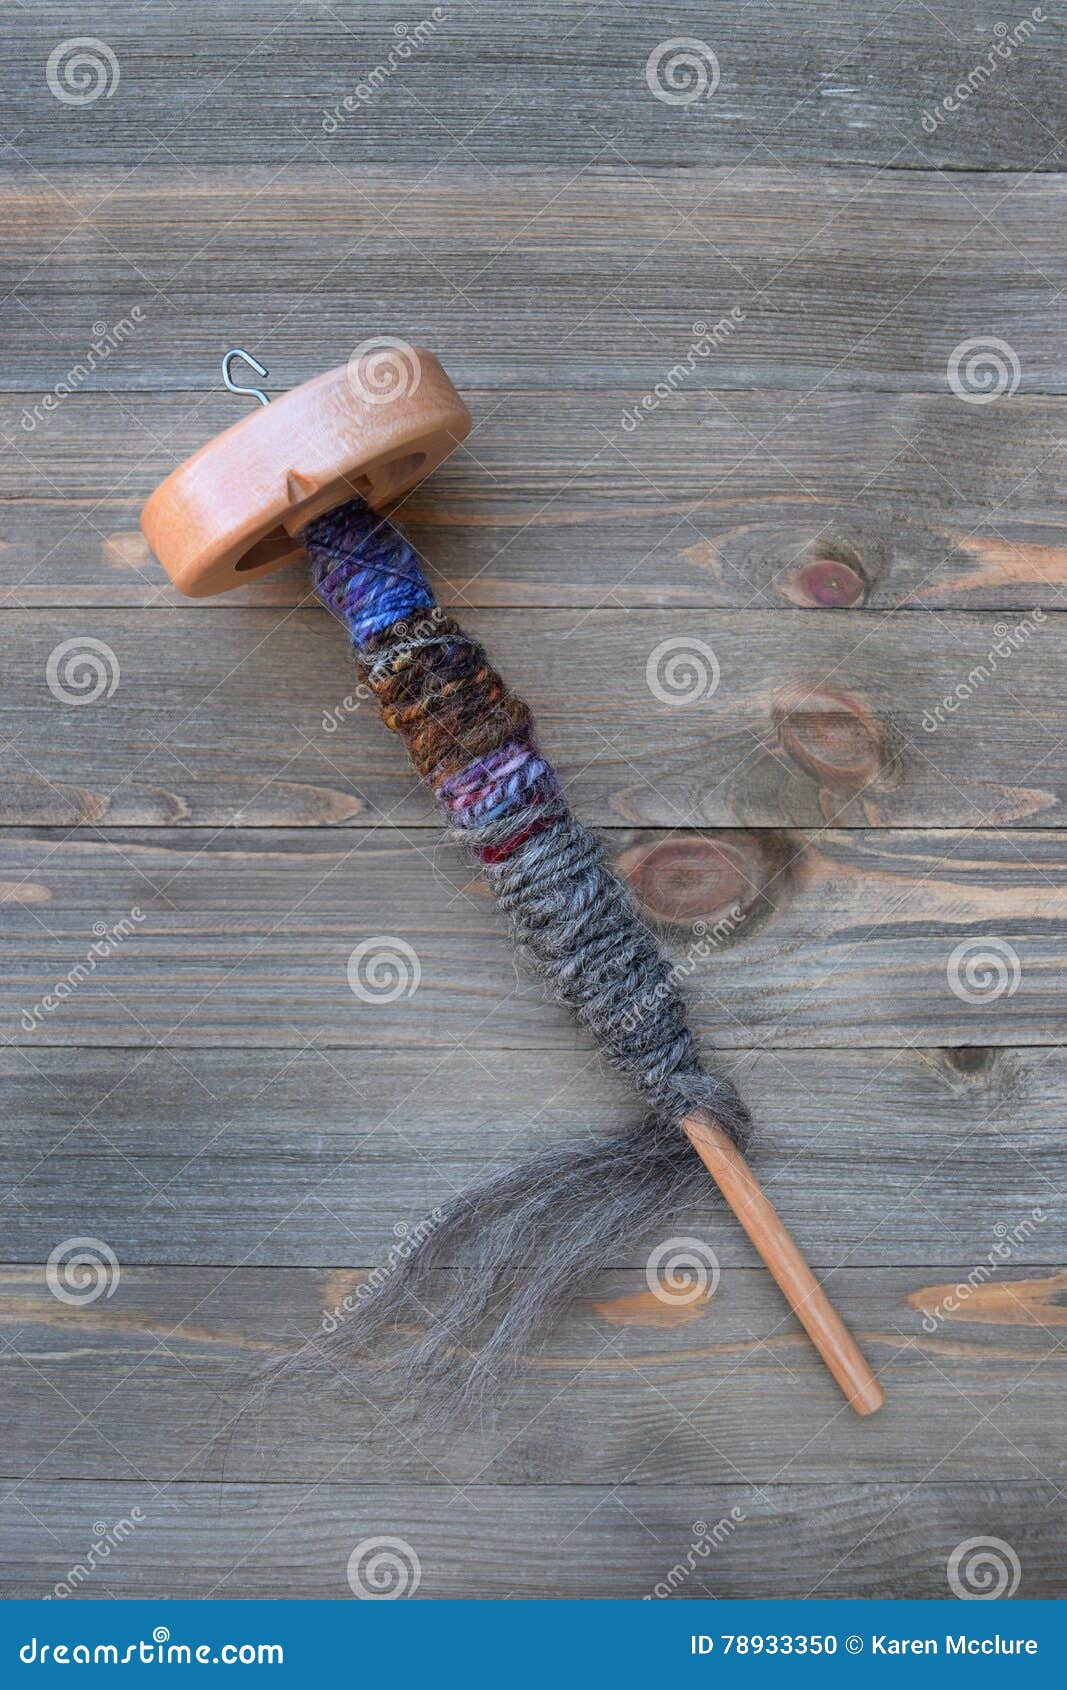 Drop Spindle For Spinning Sheep Wool Into Yarn Stock Photo 